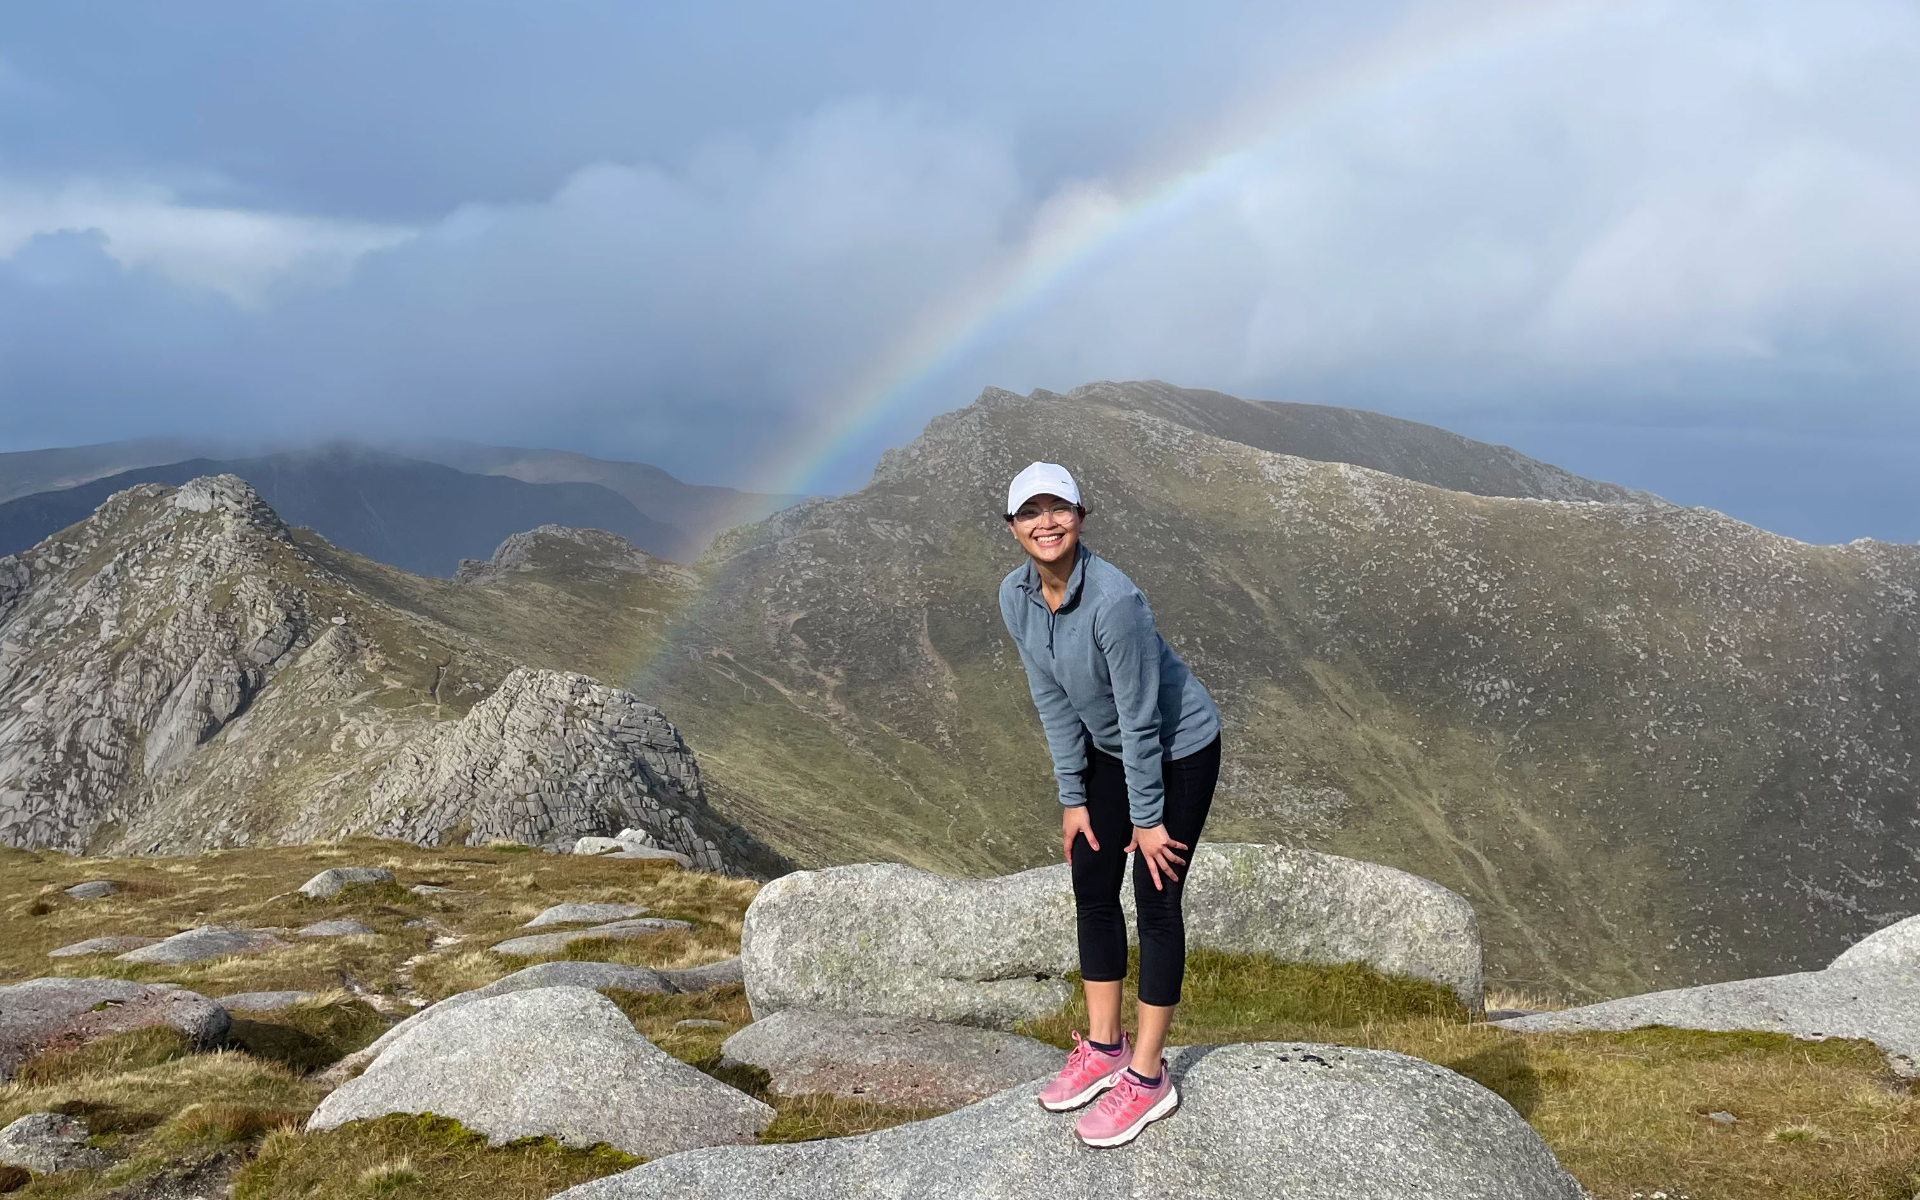 Chemical engineering student Claire hiking in the Scottish mountains